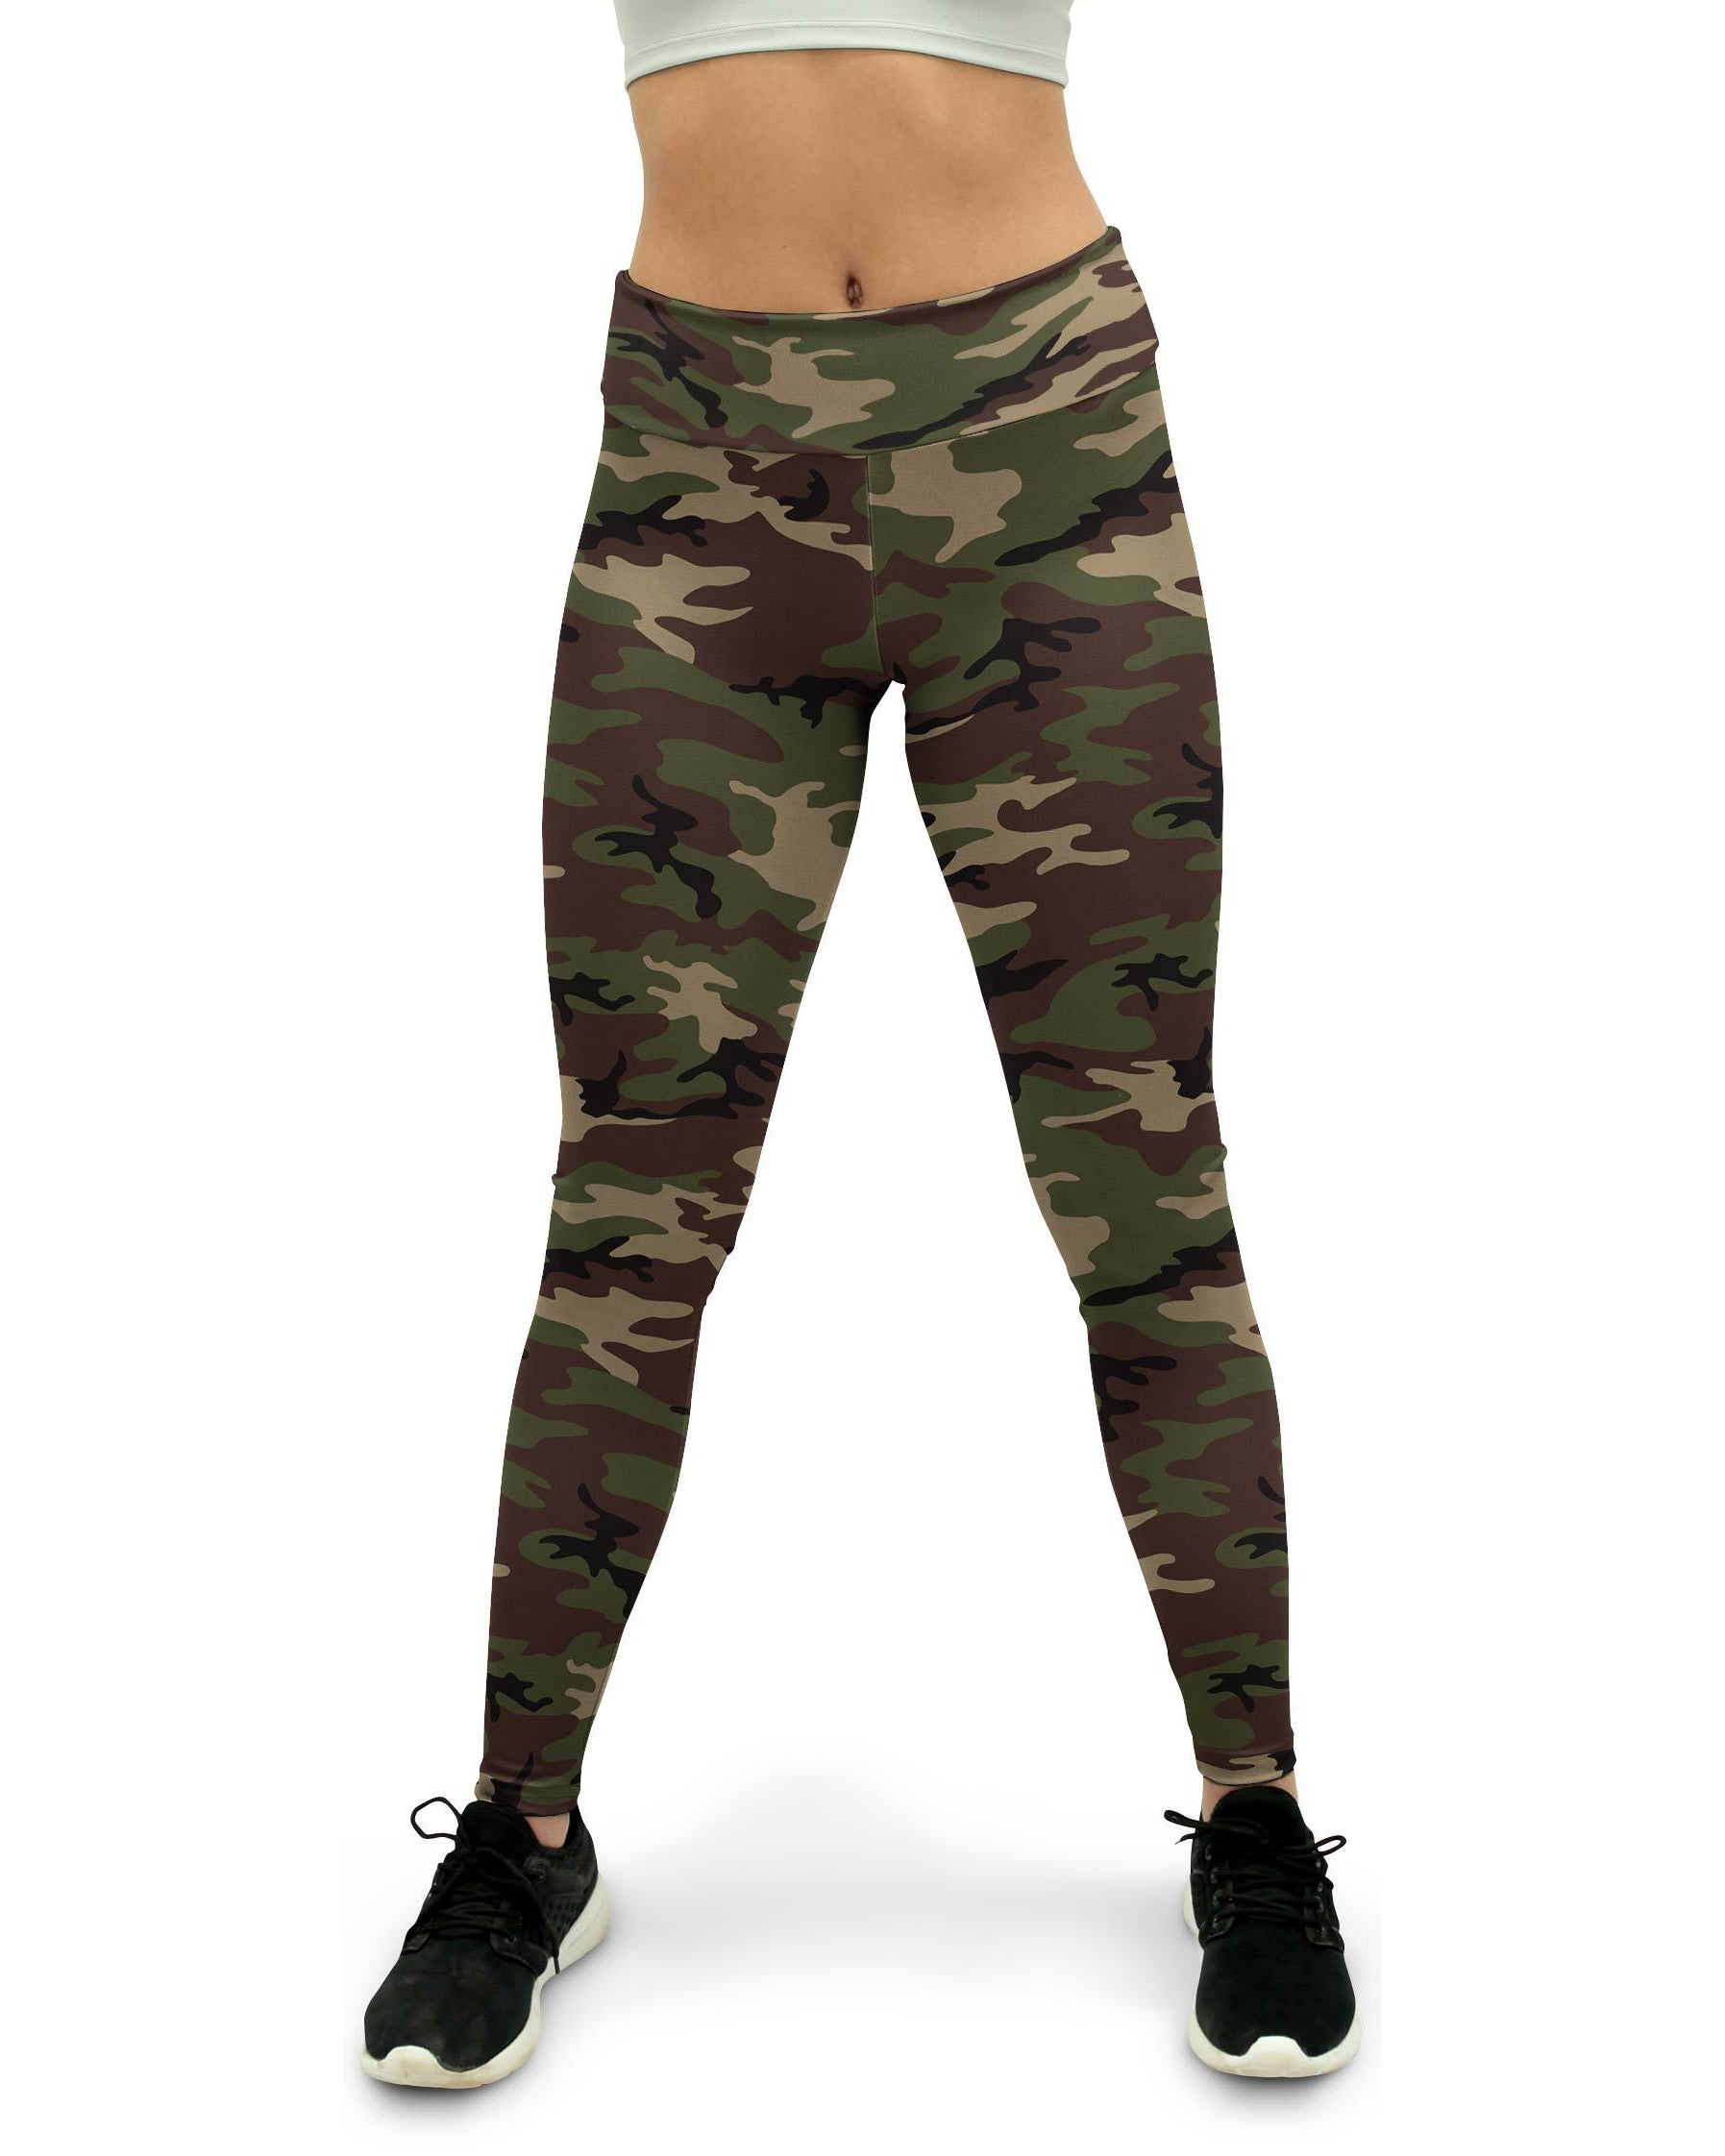 15 Minute Army workout pants for Weight Loss